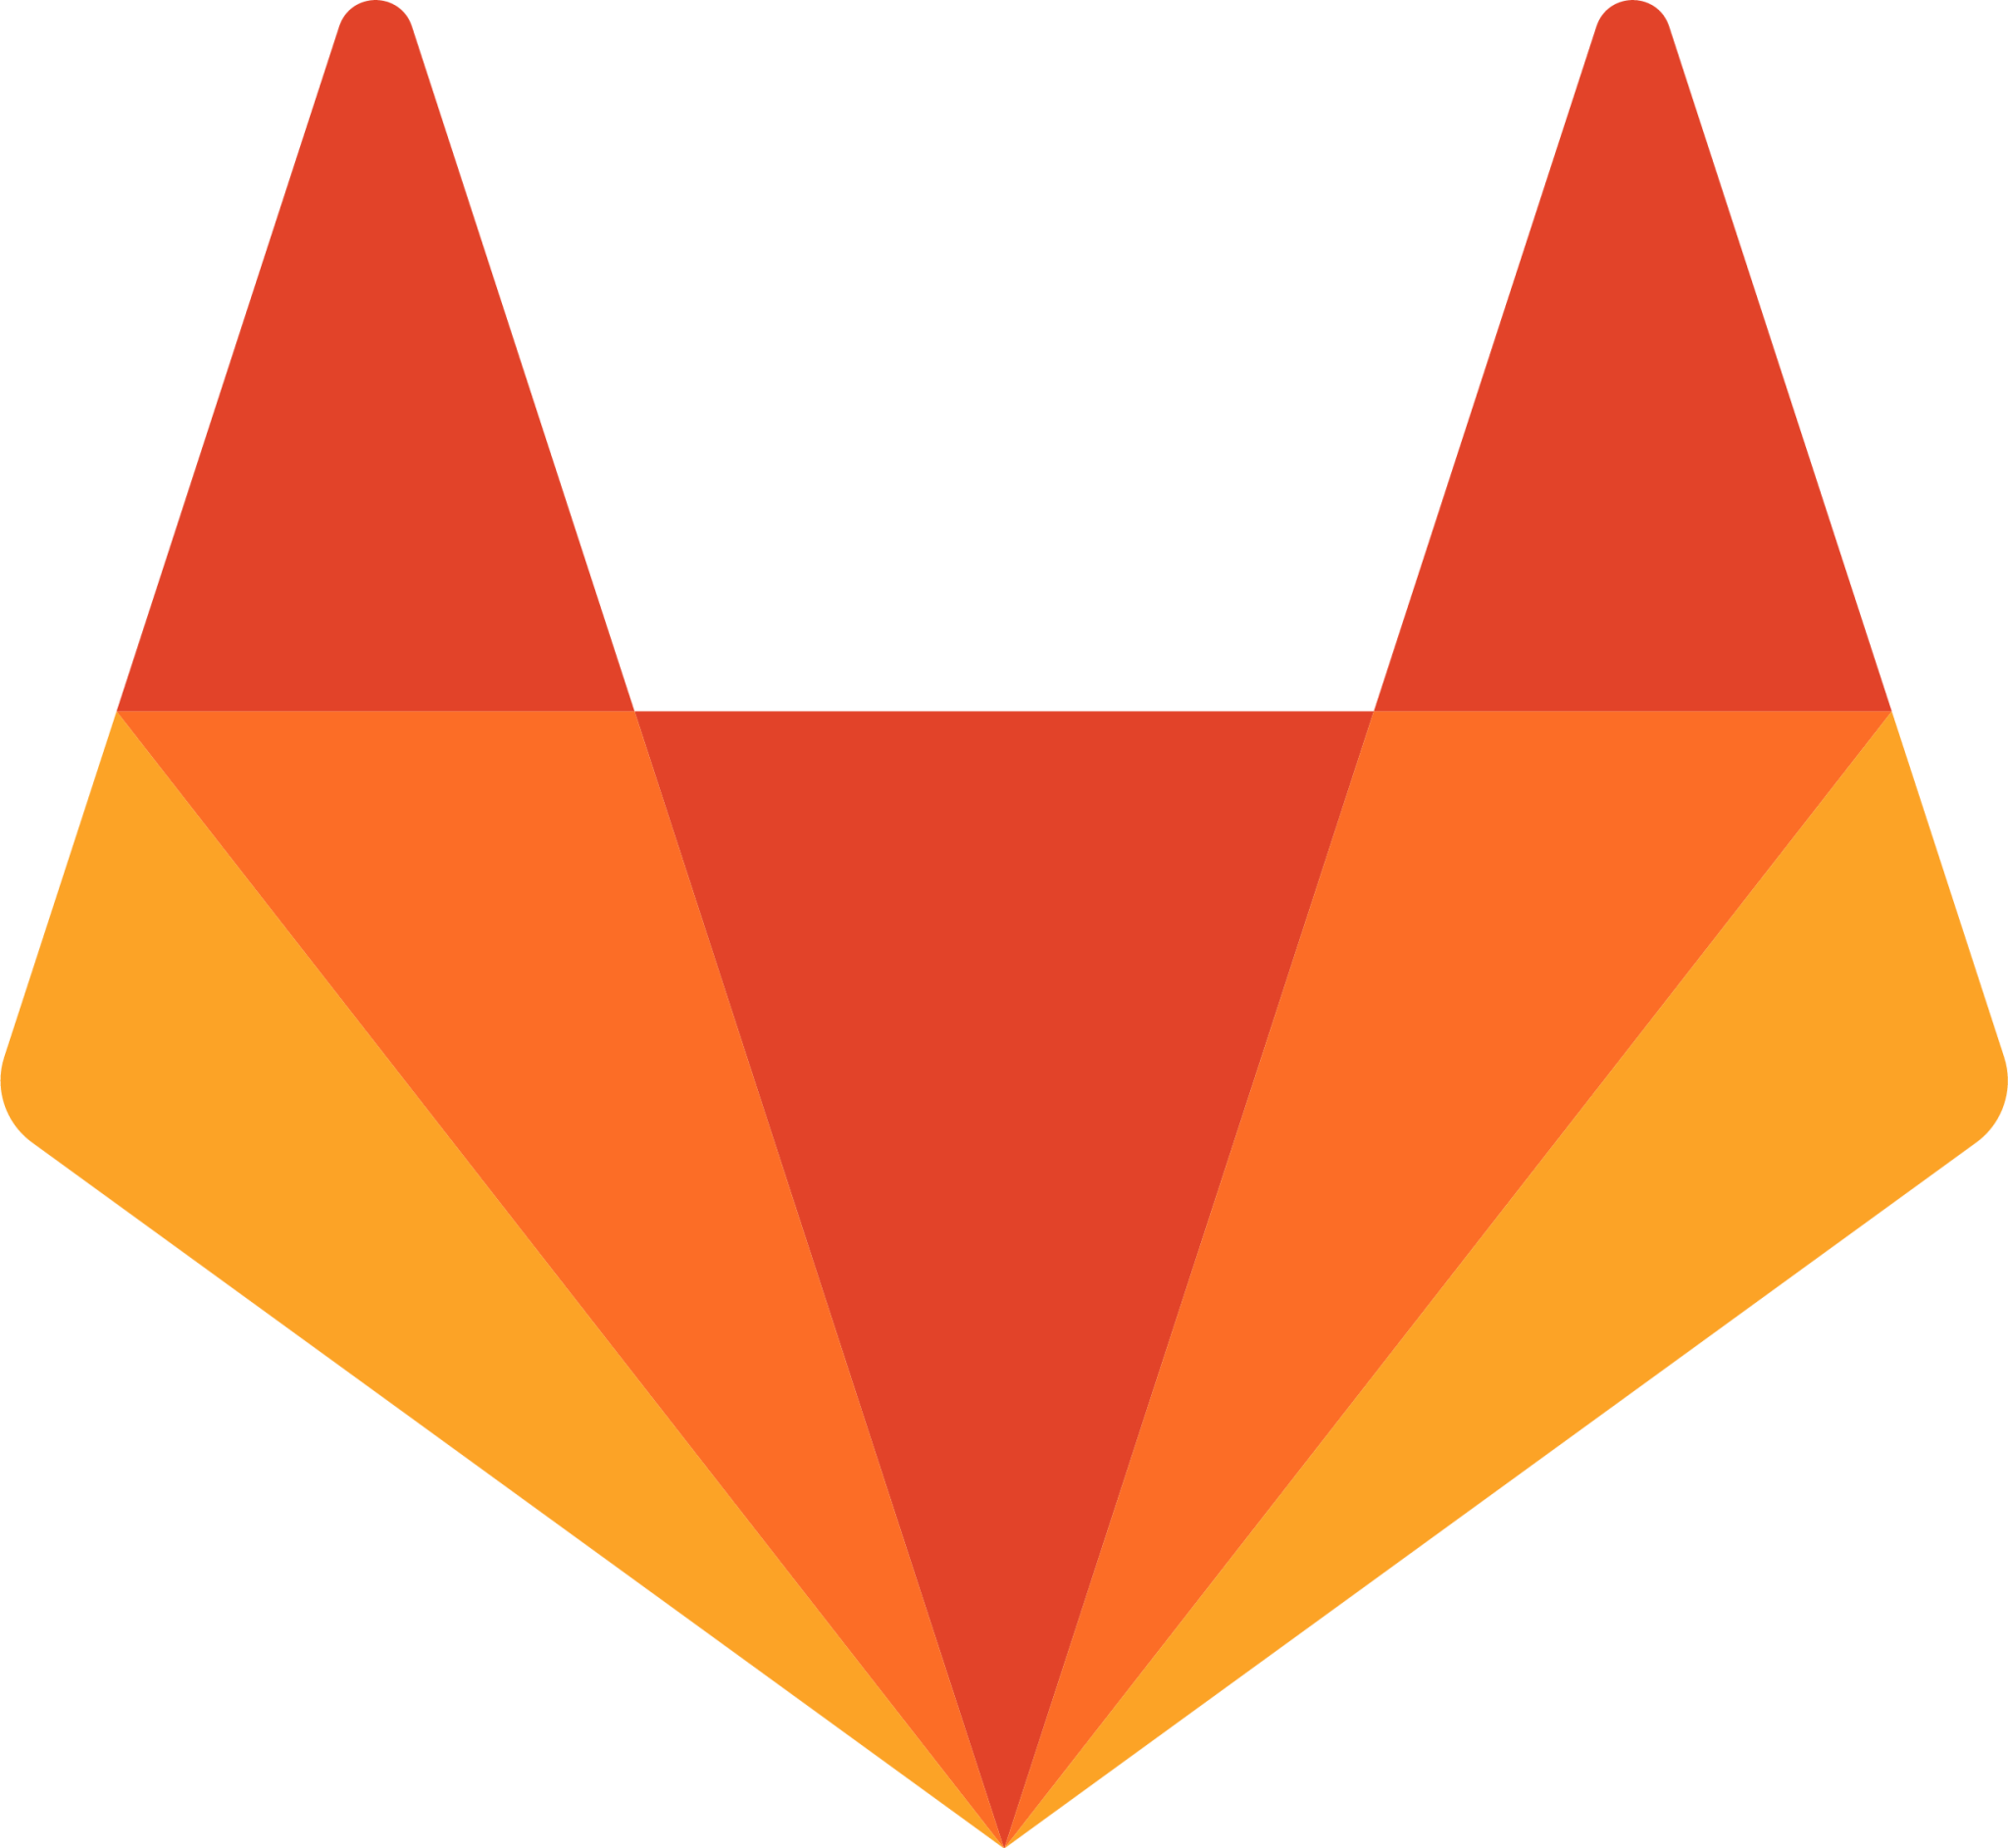 Gitlab" Icon - Download for free - Iconduck